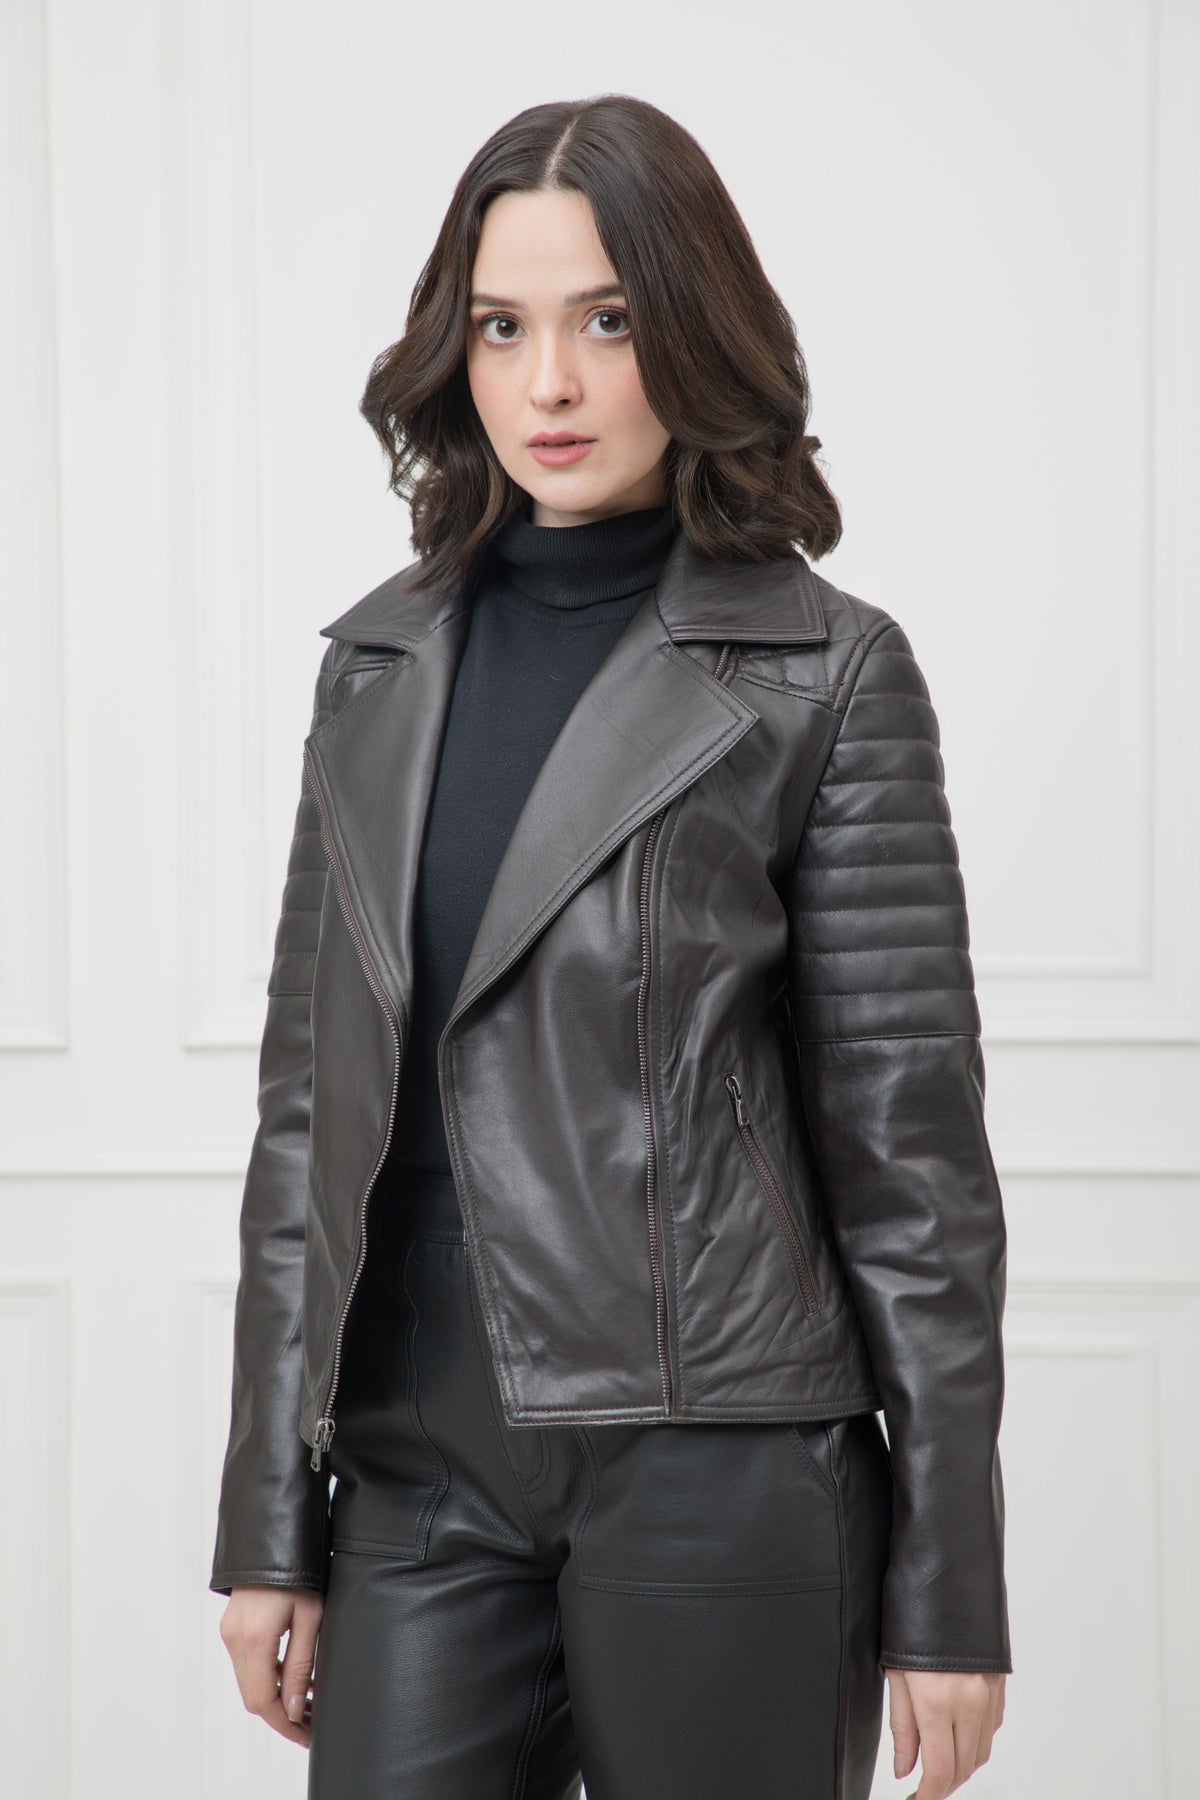 Justanned Casual Leather Jacket